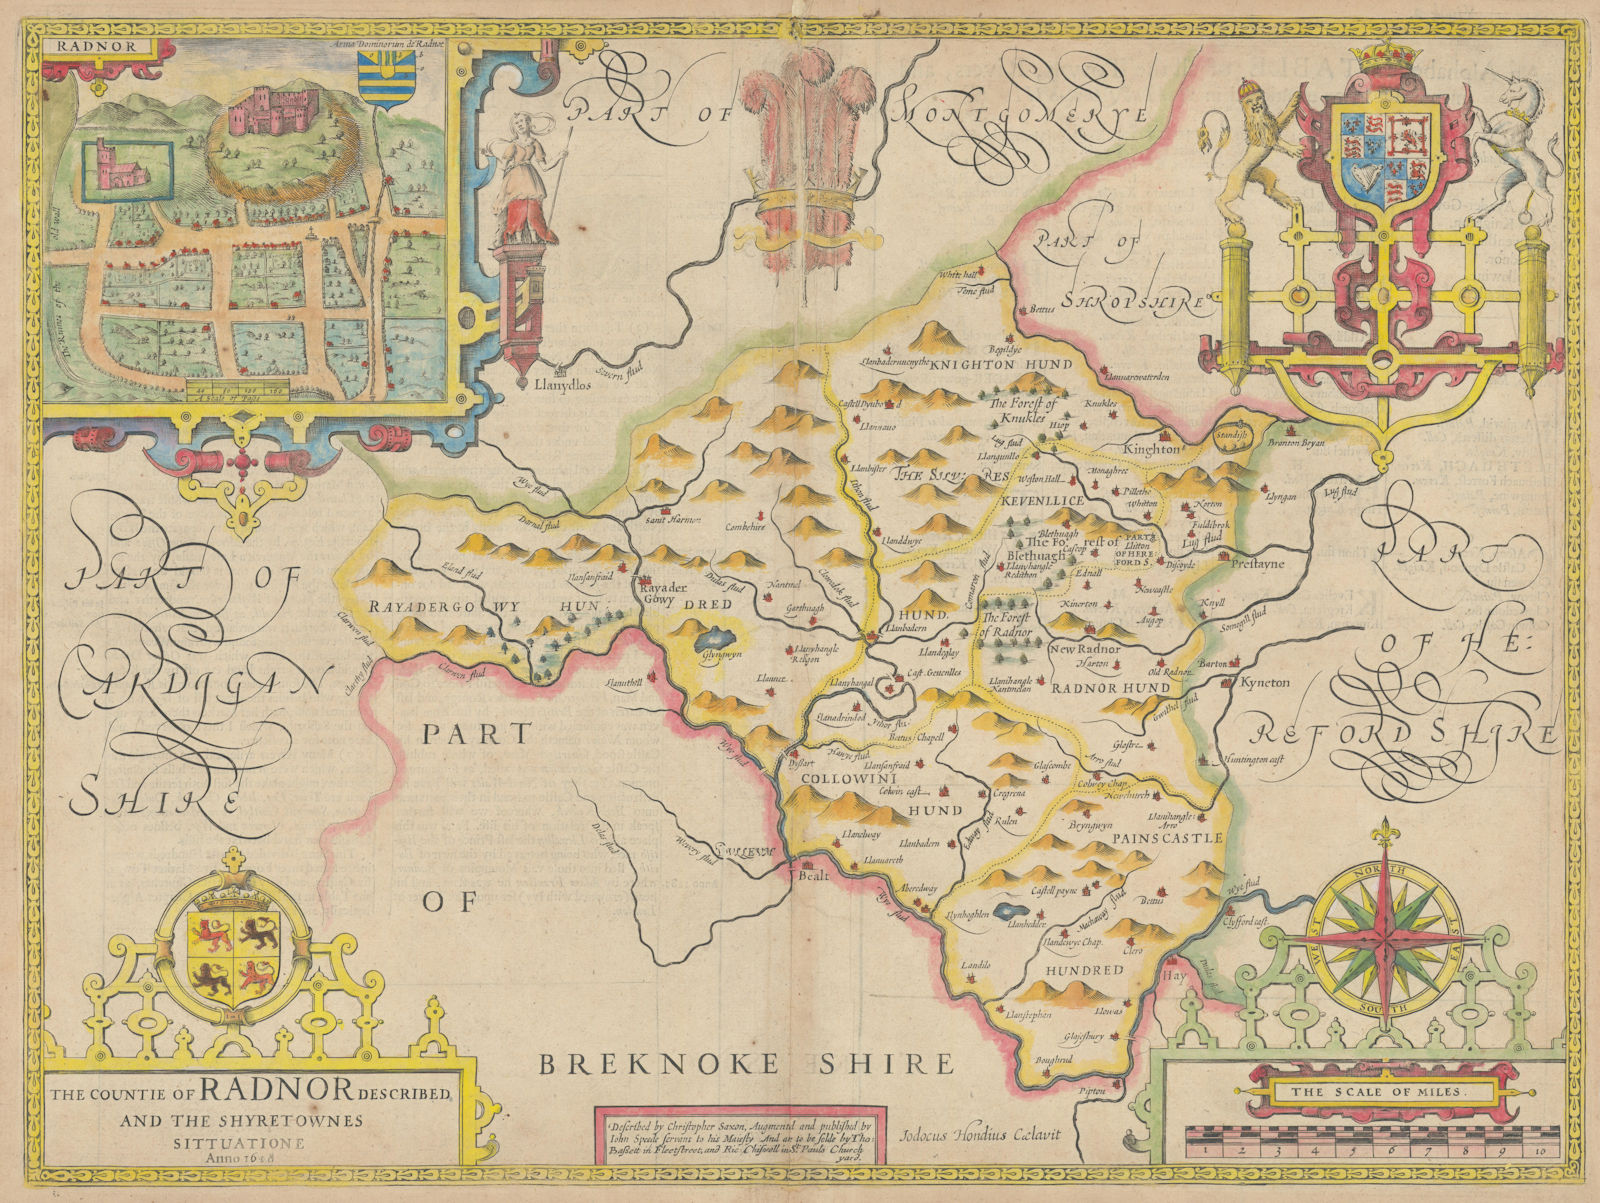 Countie of Radnor. Shire/county map by John Speed. Bassett/Chiswell edition 1676